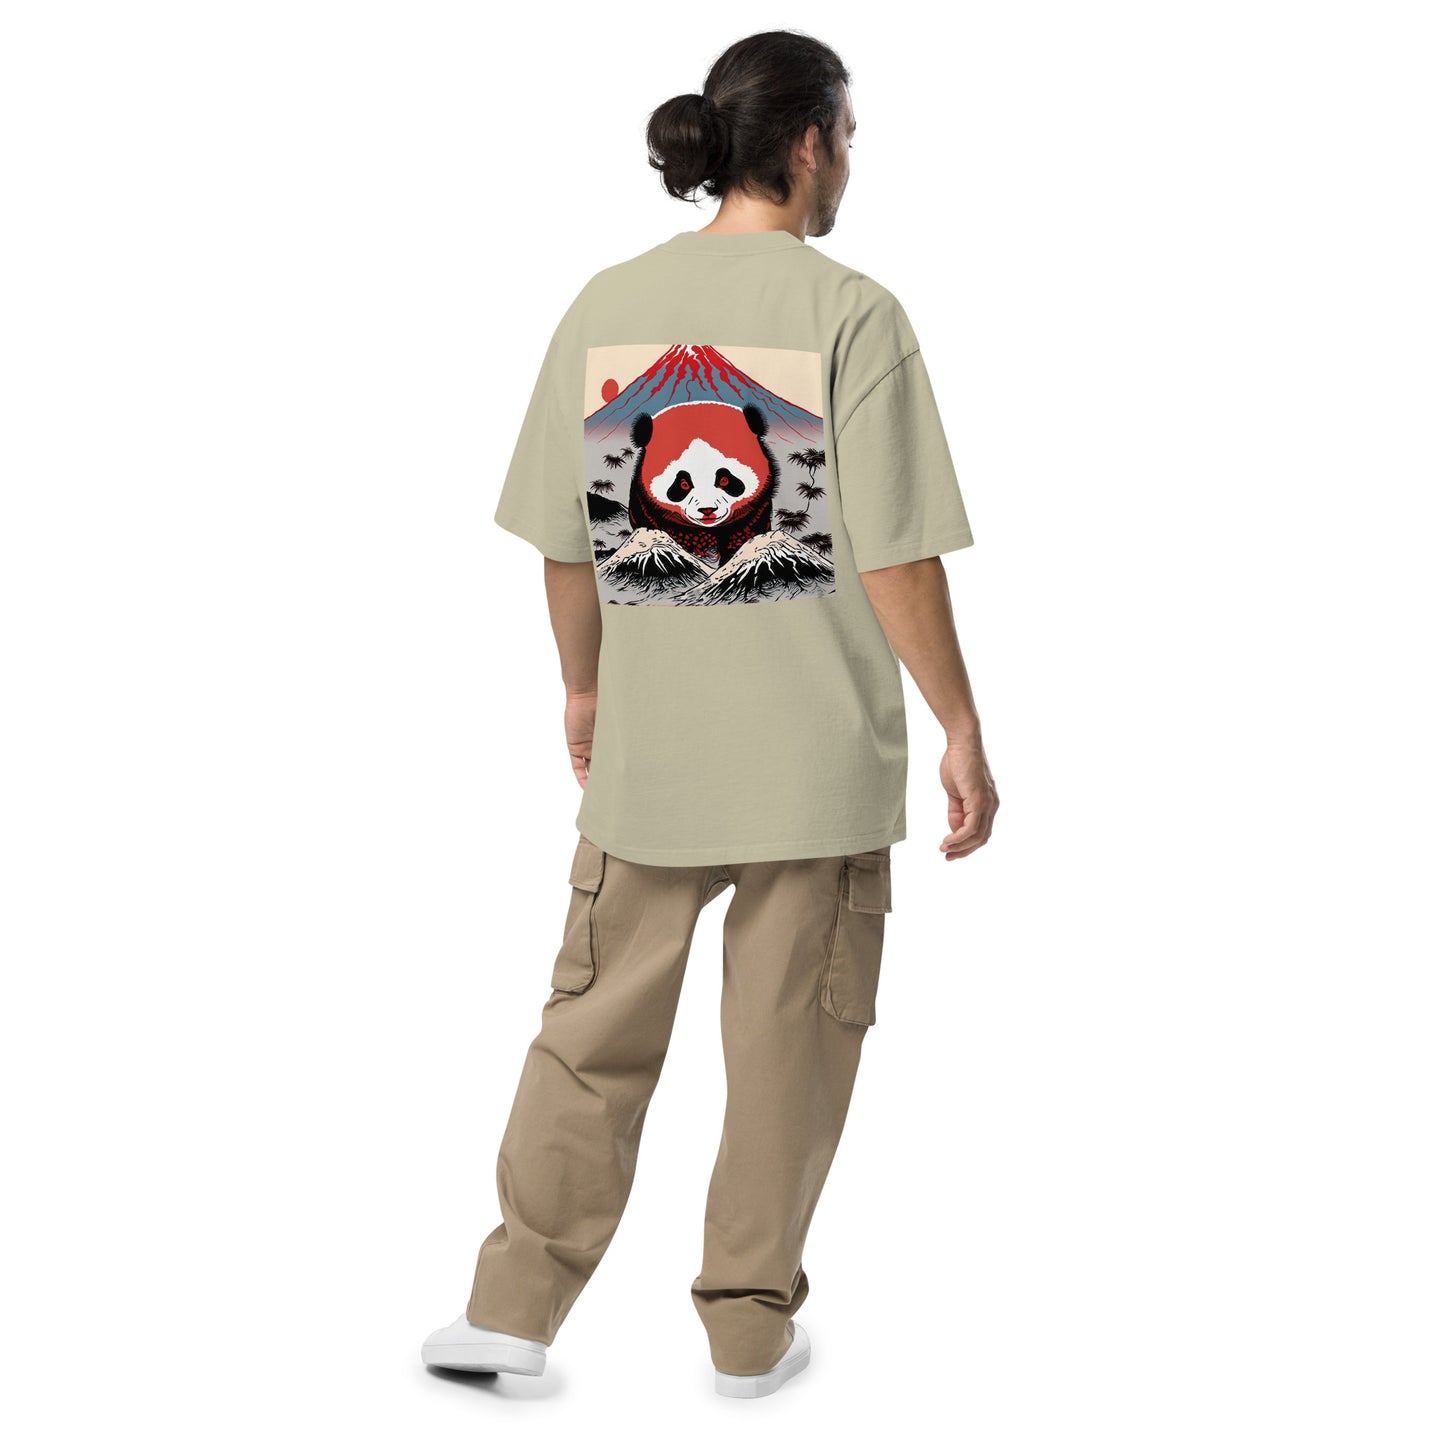 Red Panda Looking at Oppai (Woodblock Printing Style) Oversized Faded T-shirt by tokyozoodesign